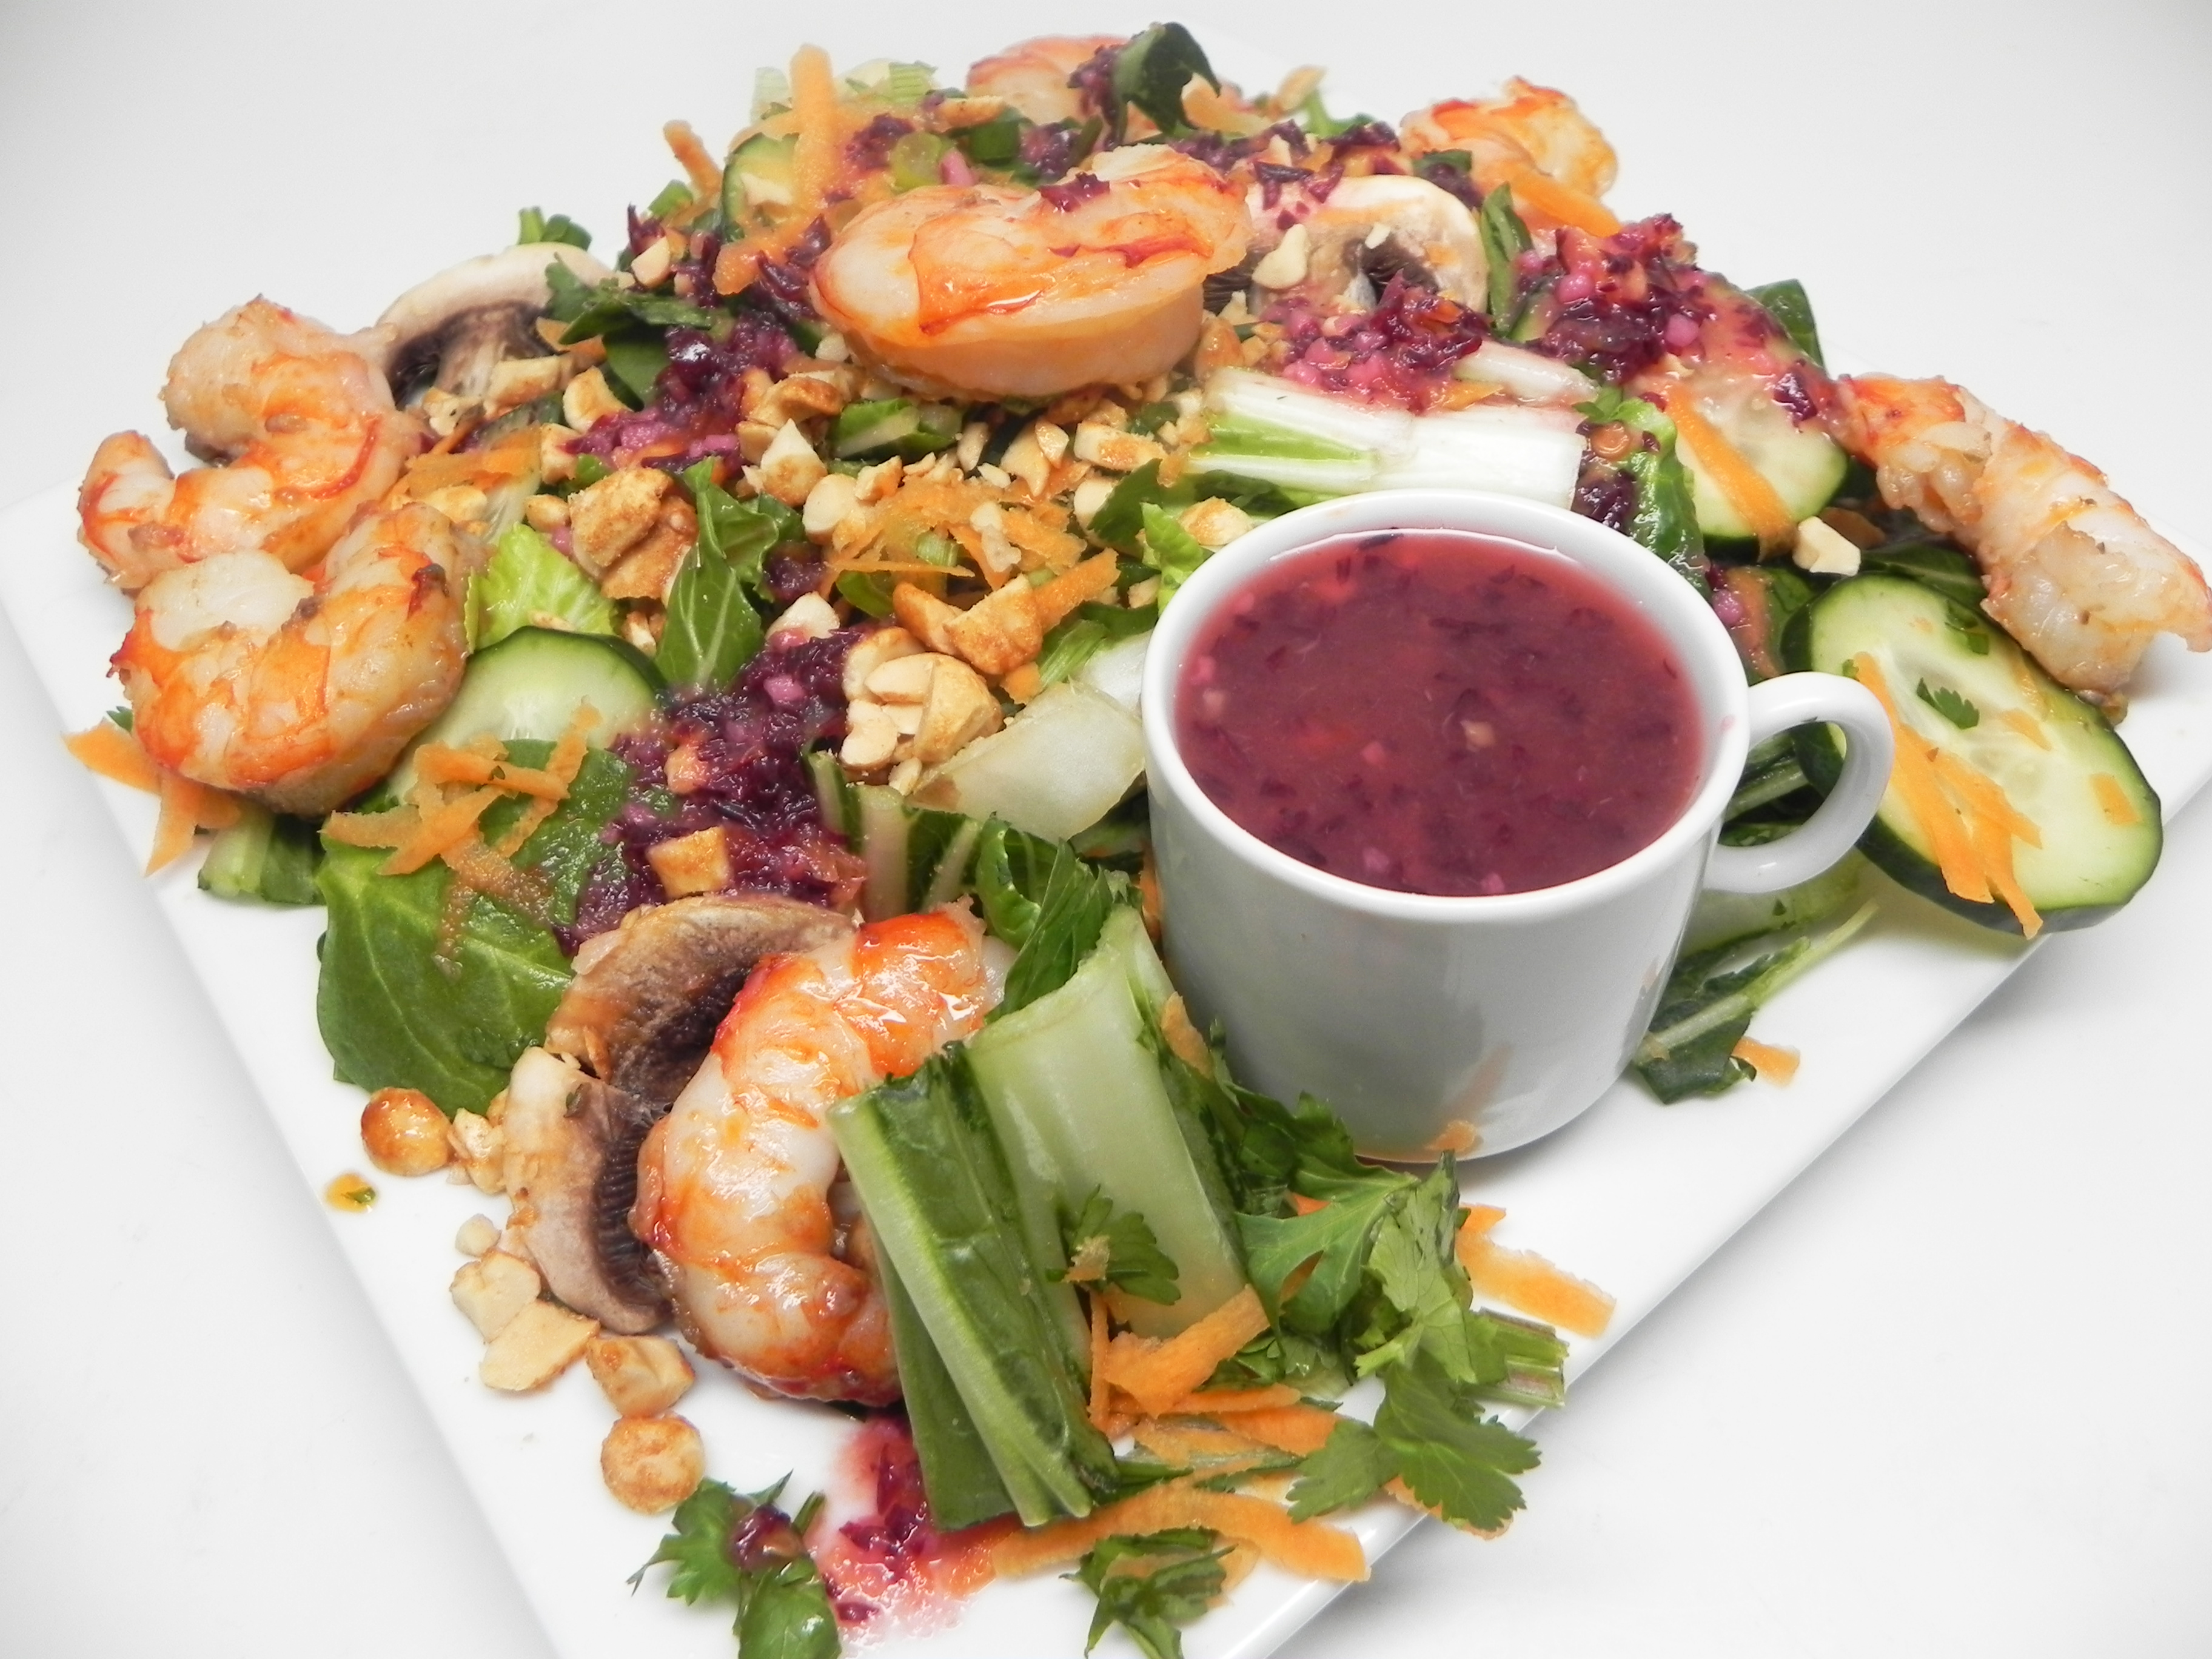 Grilled Shrimp, Pea Shoot, and Bok Choy Salad with Asian Reduced Fat Dressing